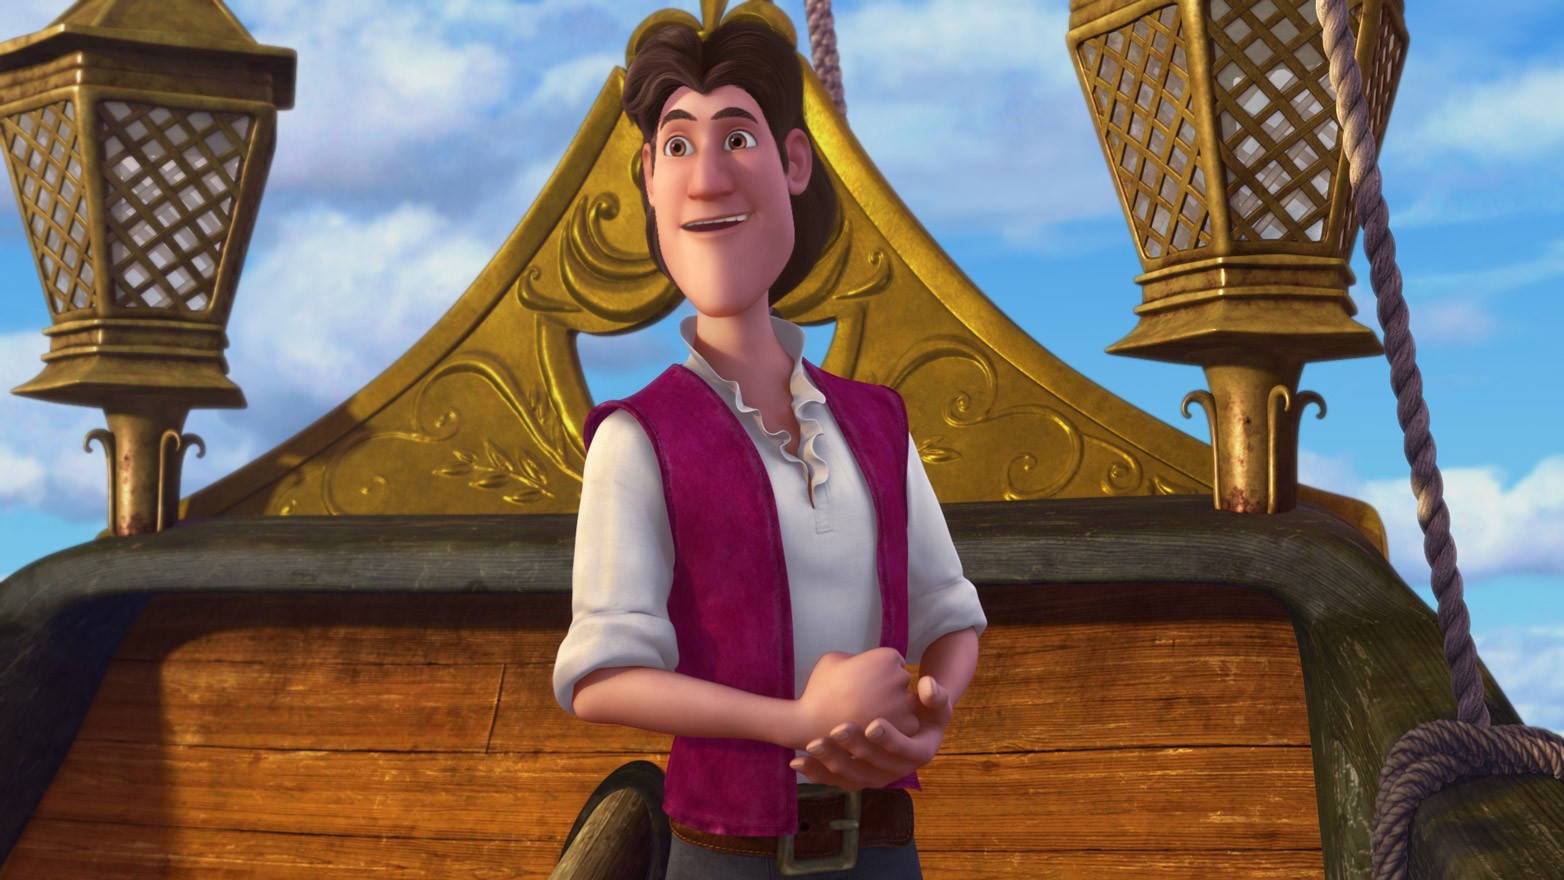 Captain James Hook from Walt Disney Pictures' The Pirate Fairy (2014)